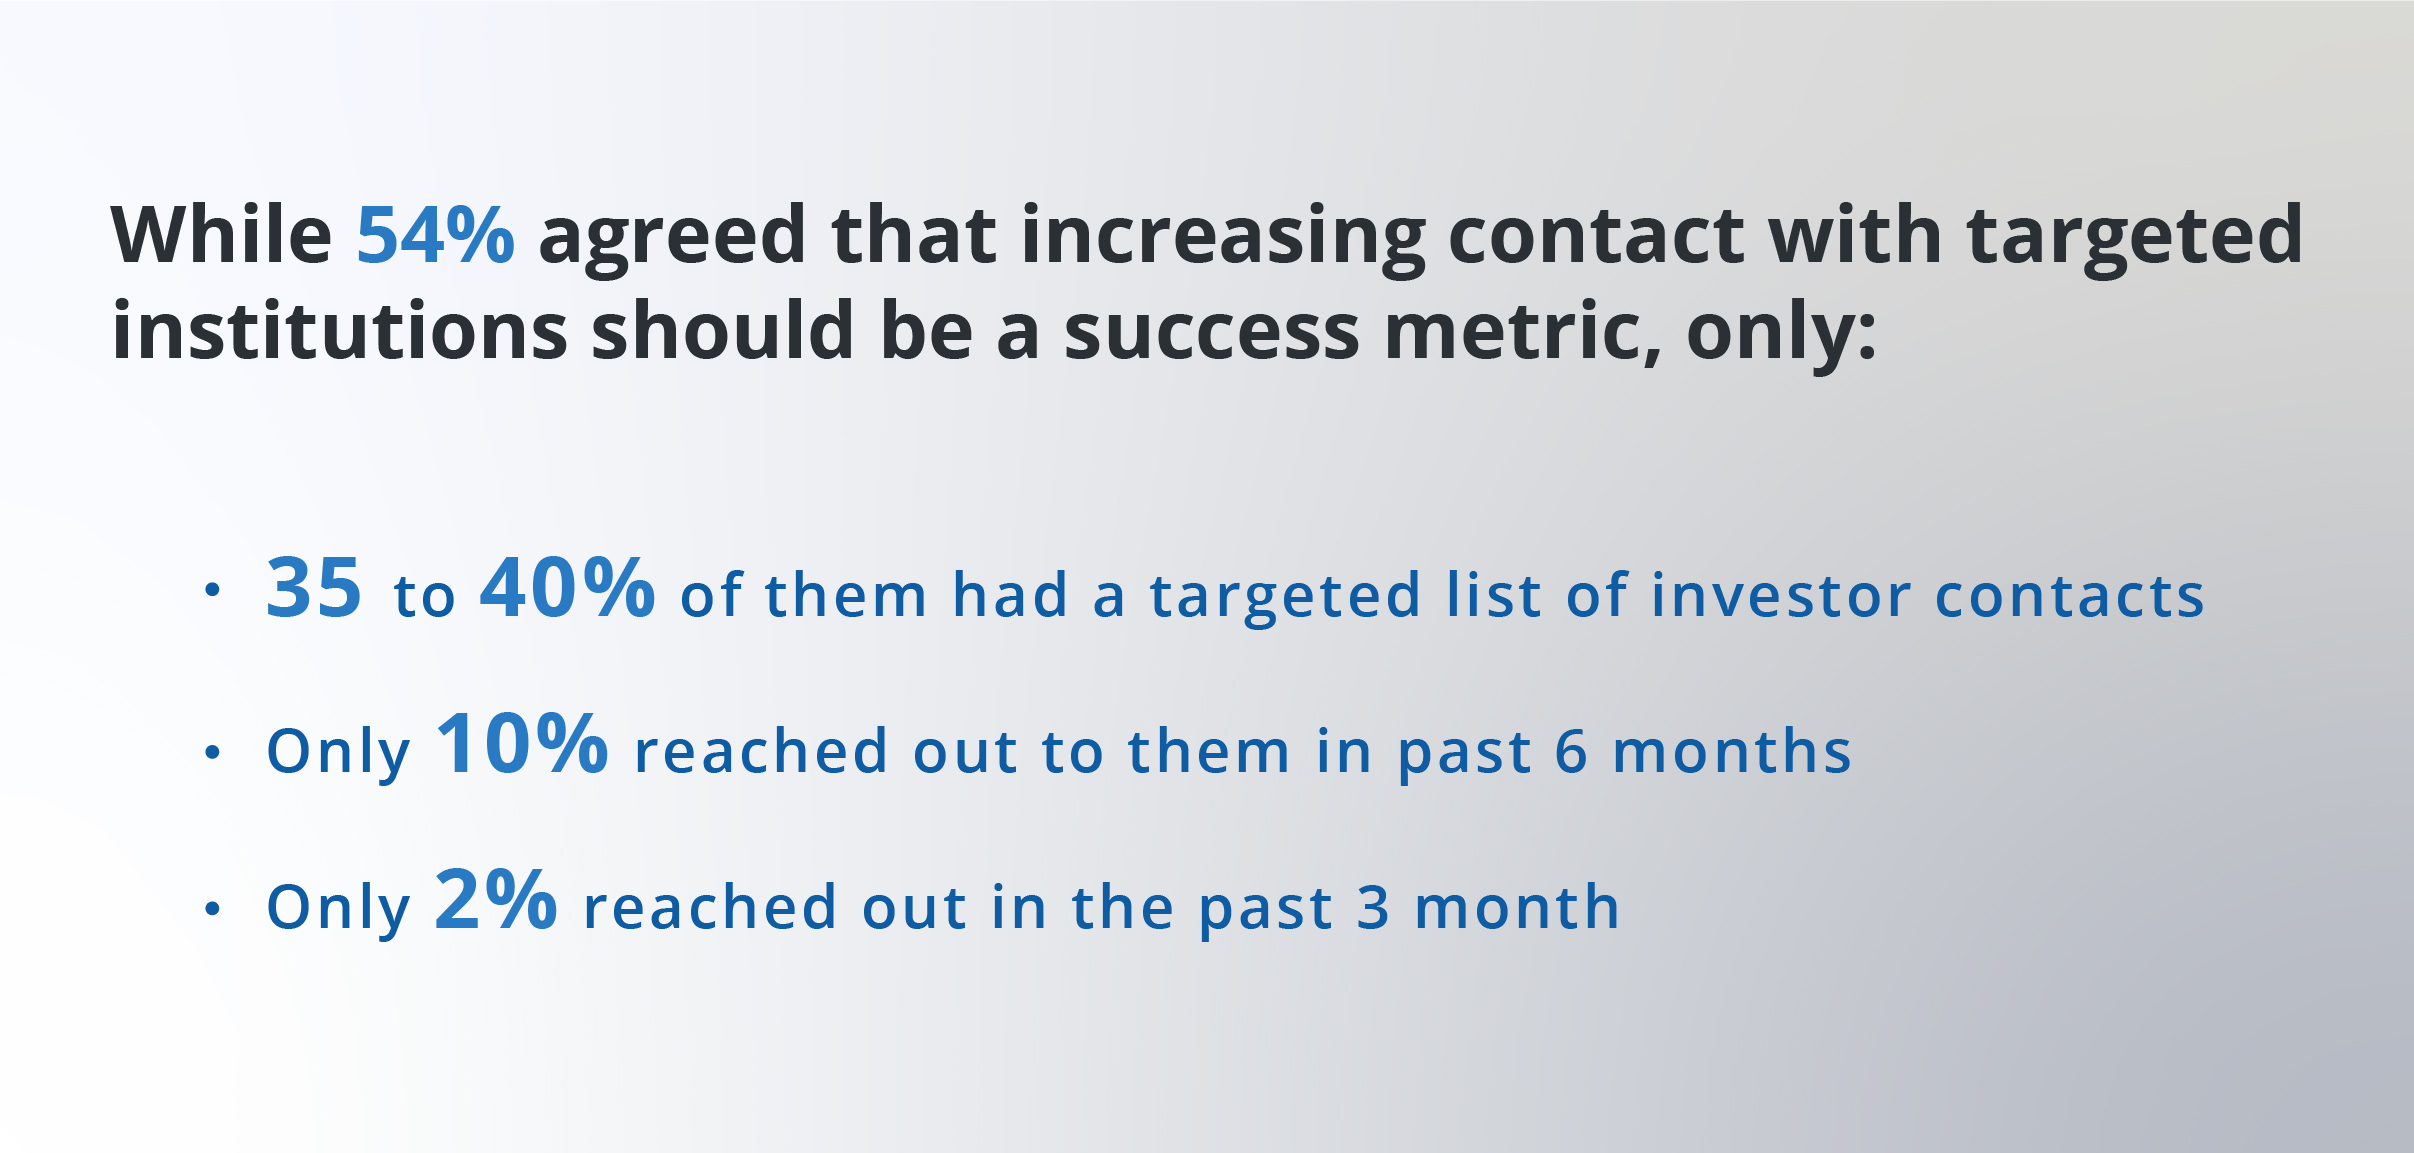 54% agreed that increasing contact with targeted institutions should be a success metric